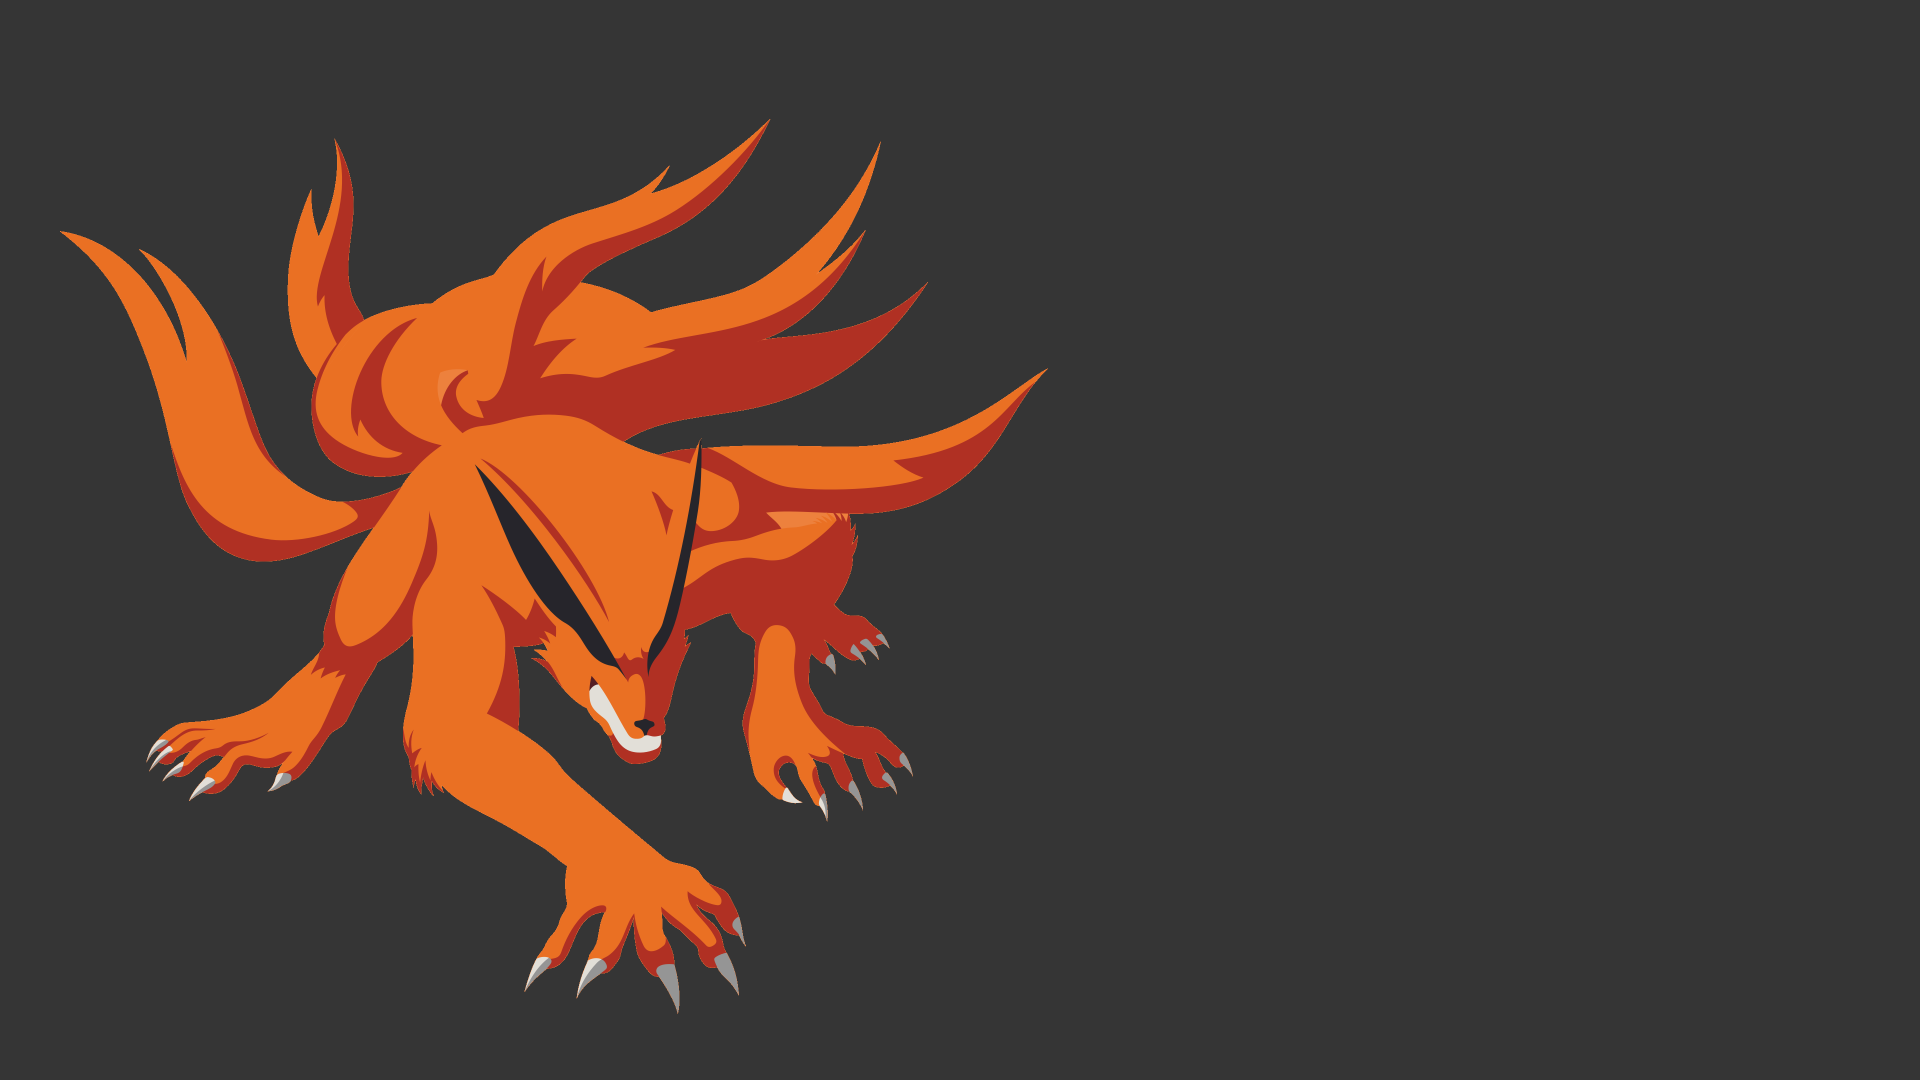 Nine tailed fox Wallpaper Background Image. View, download, comment, and rate. Naruto, Naruto wallpaper, Cat vector